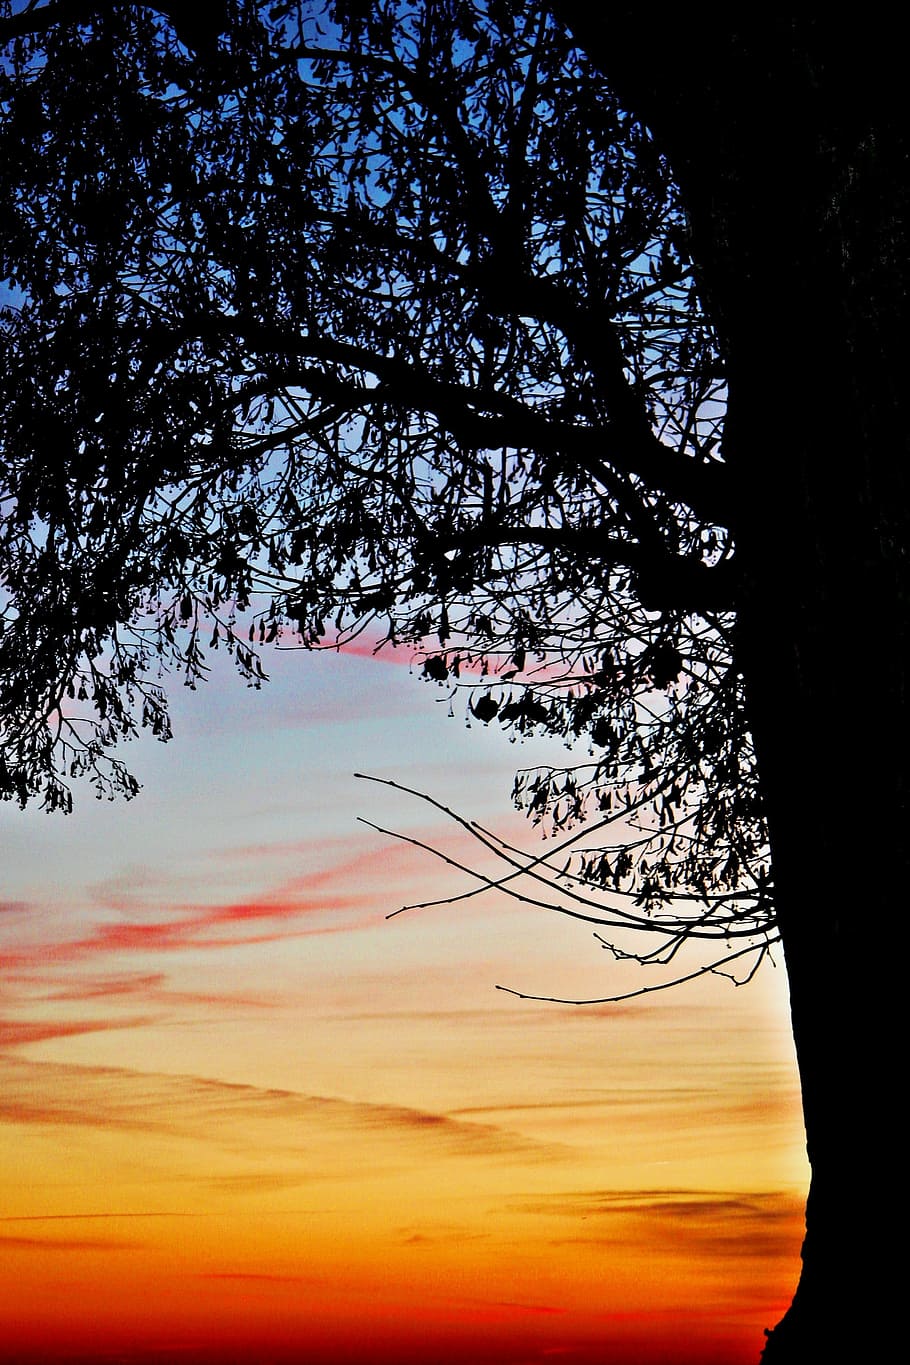 Sunset, Tree, Nature, Contrast, Colorful, sunset, tree, black, leaves, aesthetic, branches